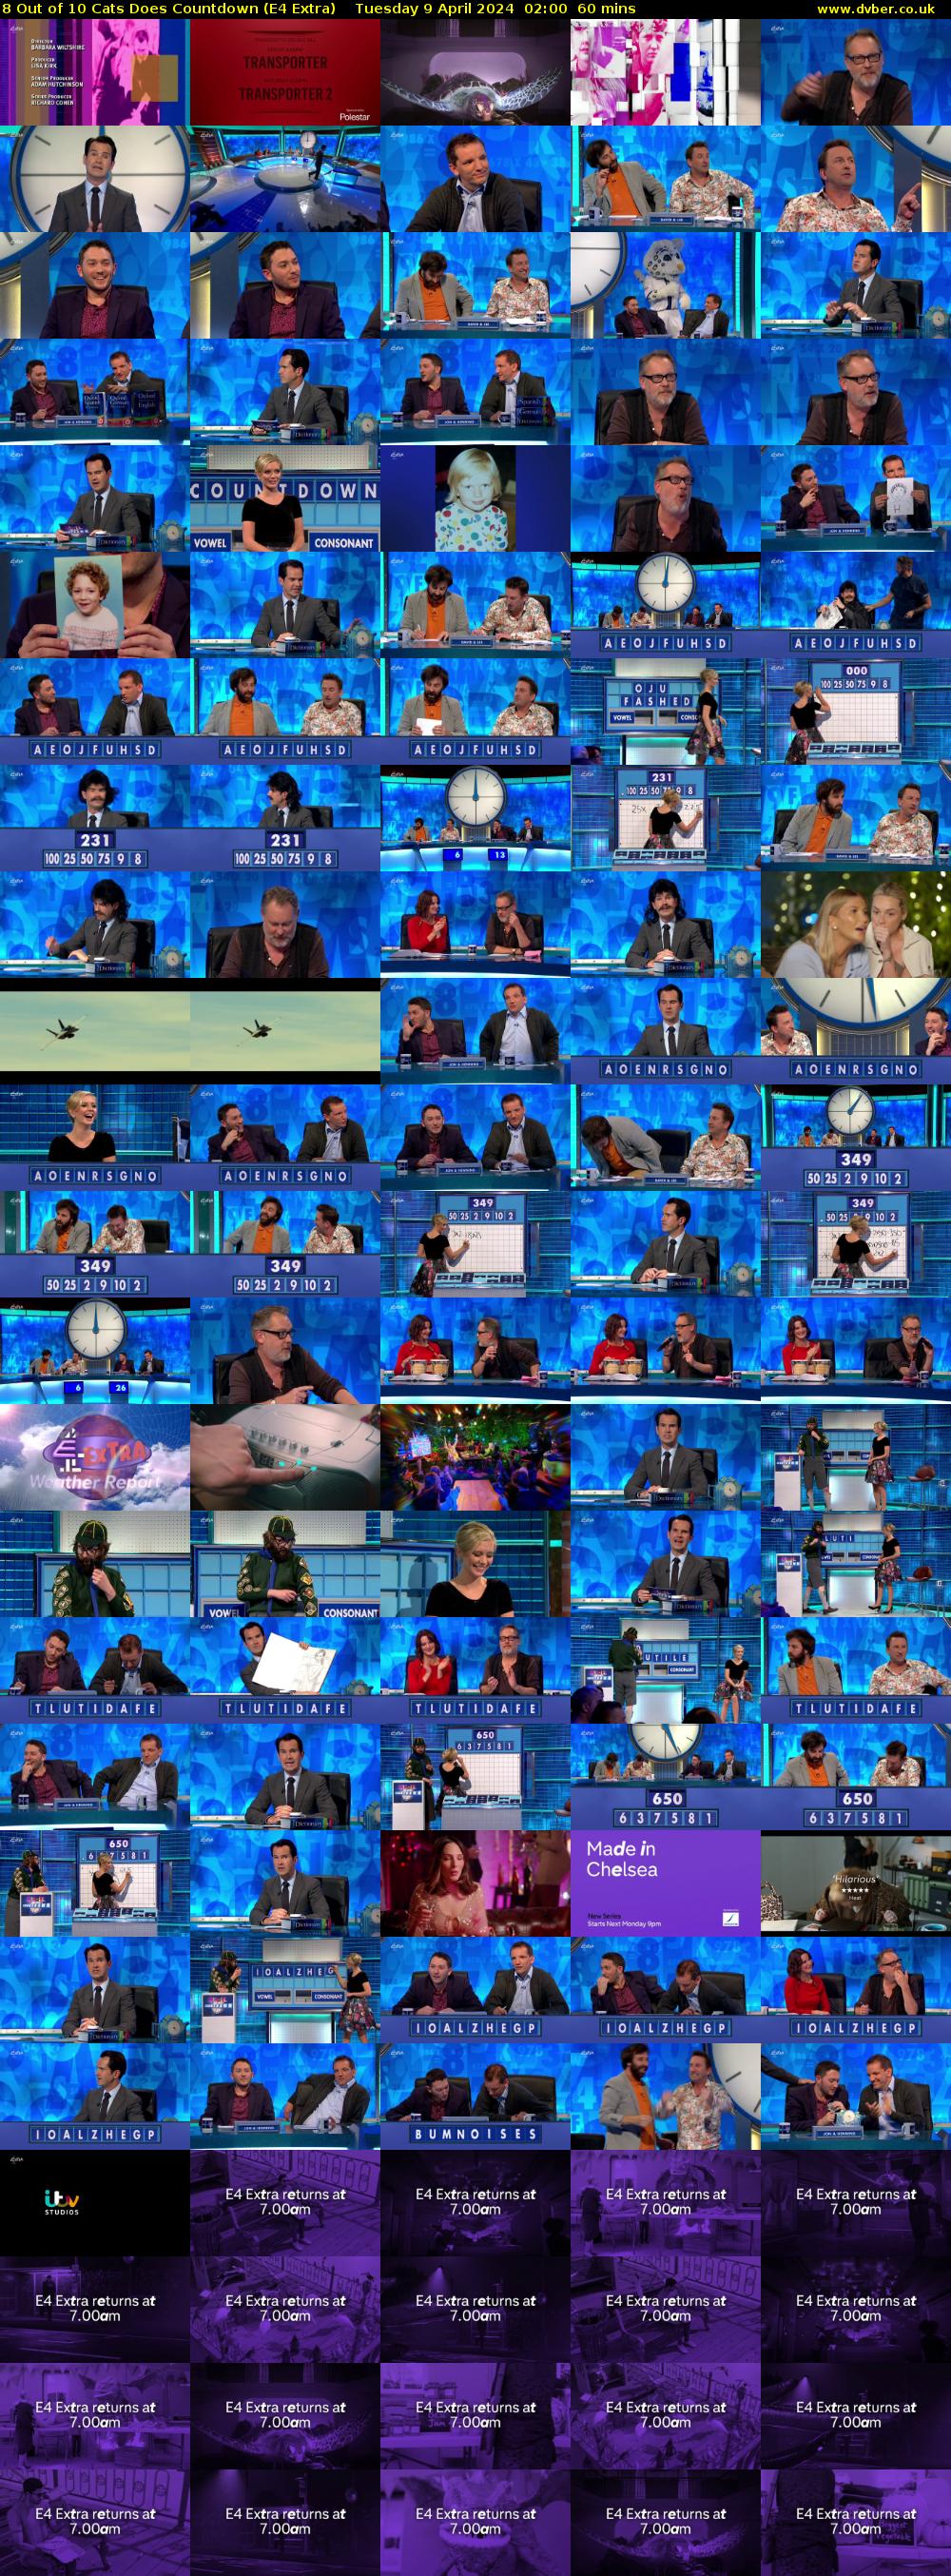 8 Out of 10 Cats Does Countdown (E4 Extra) Tuesday 9 April 2024 02:00 - 03:00